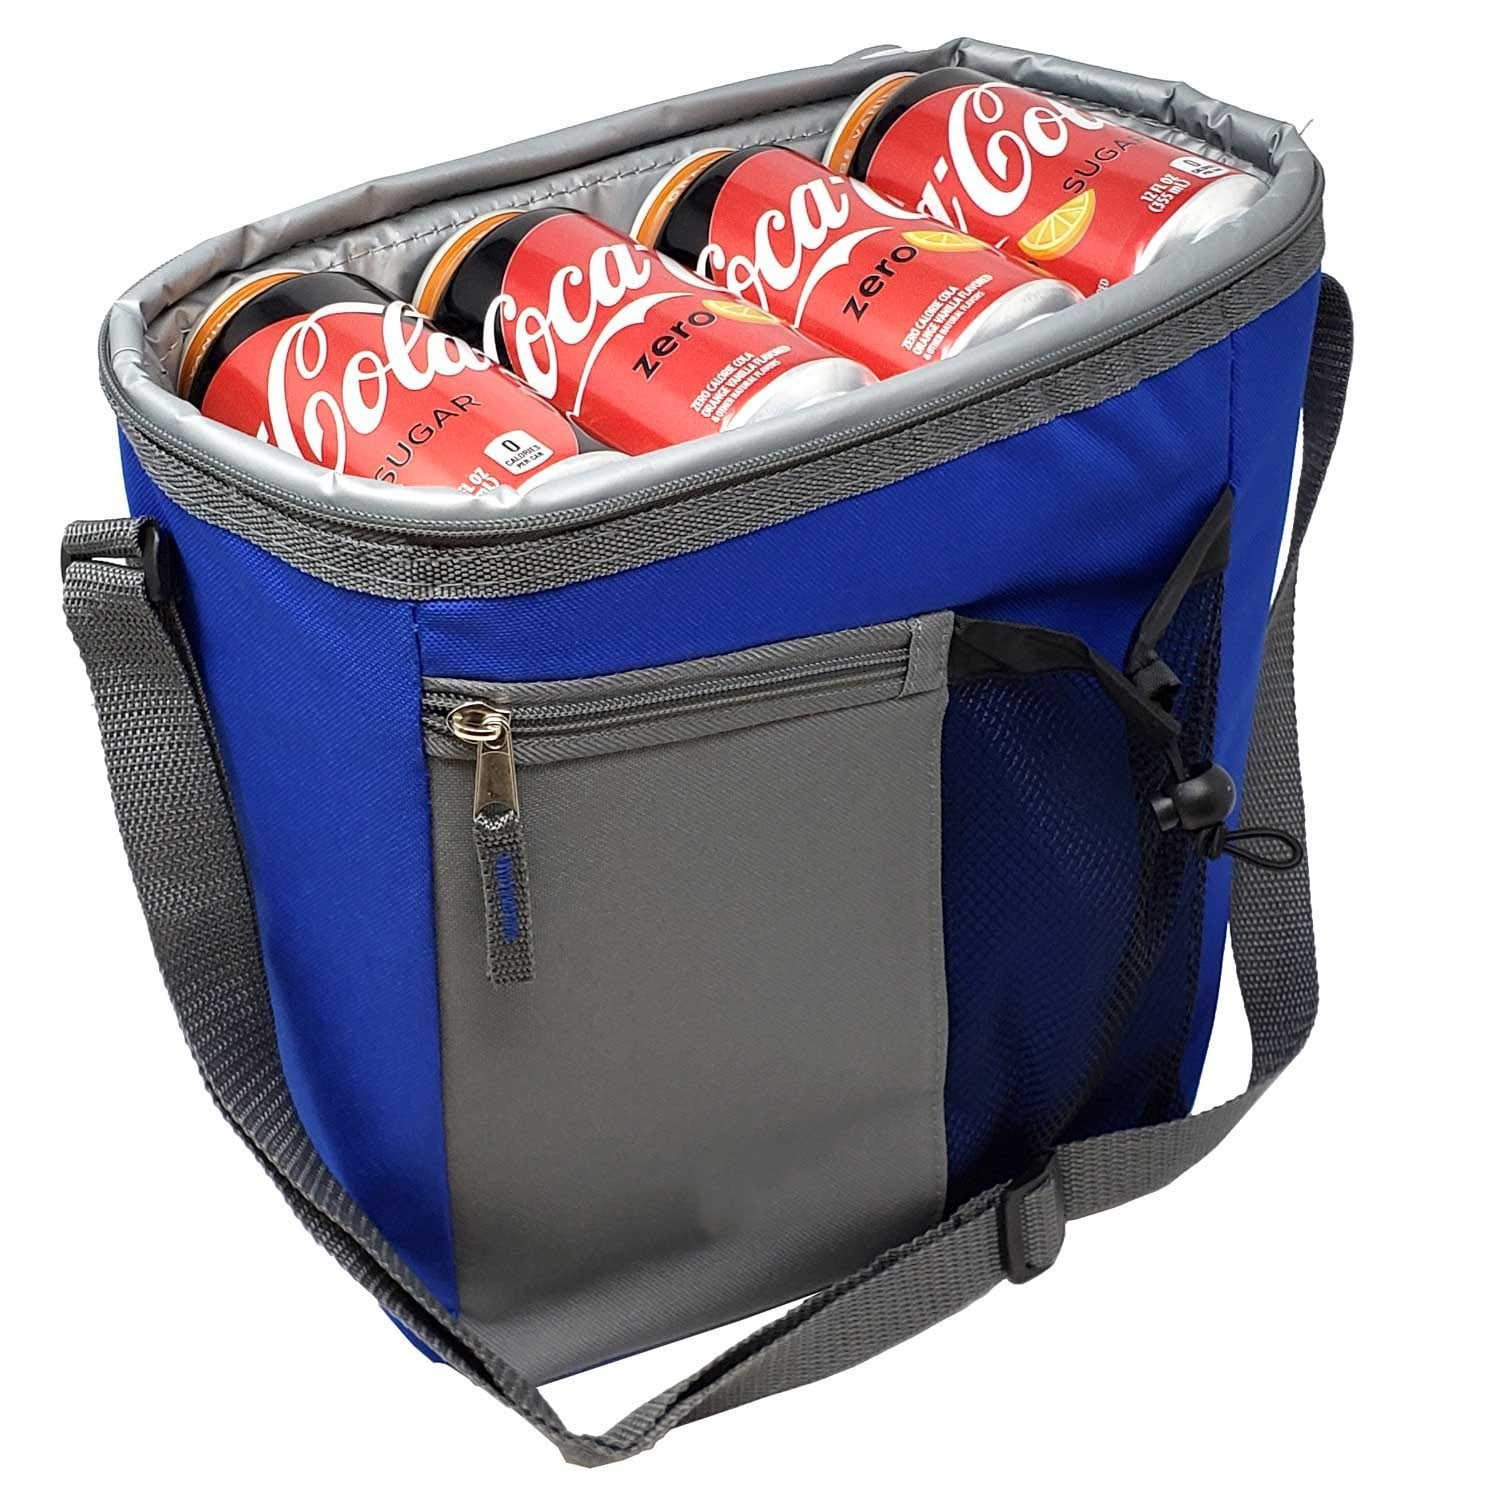 Insulated Can Cool Cooler Carry Drinks Picnic Cold Bag with Side Mesh Pocket